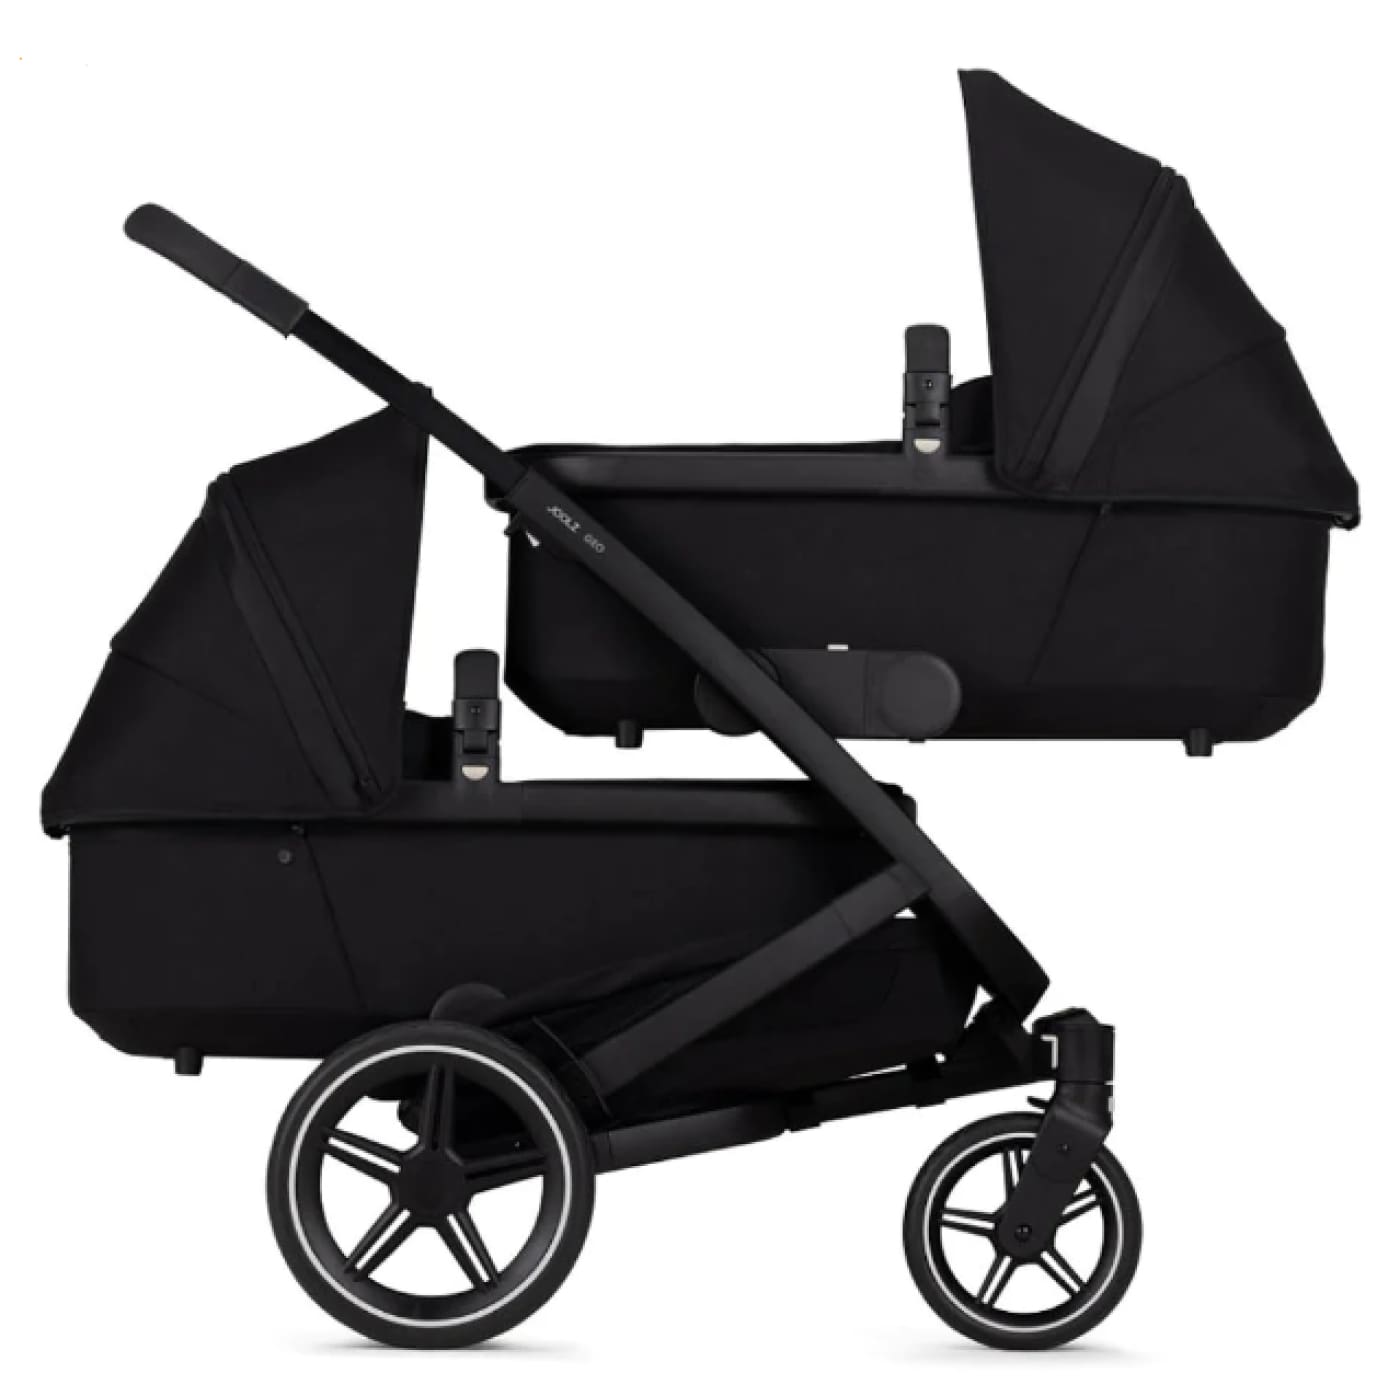 Joolz Geo3 Twin Stroller - Brilliant Black (2 Seat + 2 Carry Cot) - Brilliant Black - PRAMS & STROLLERS - PACKAGES